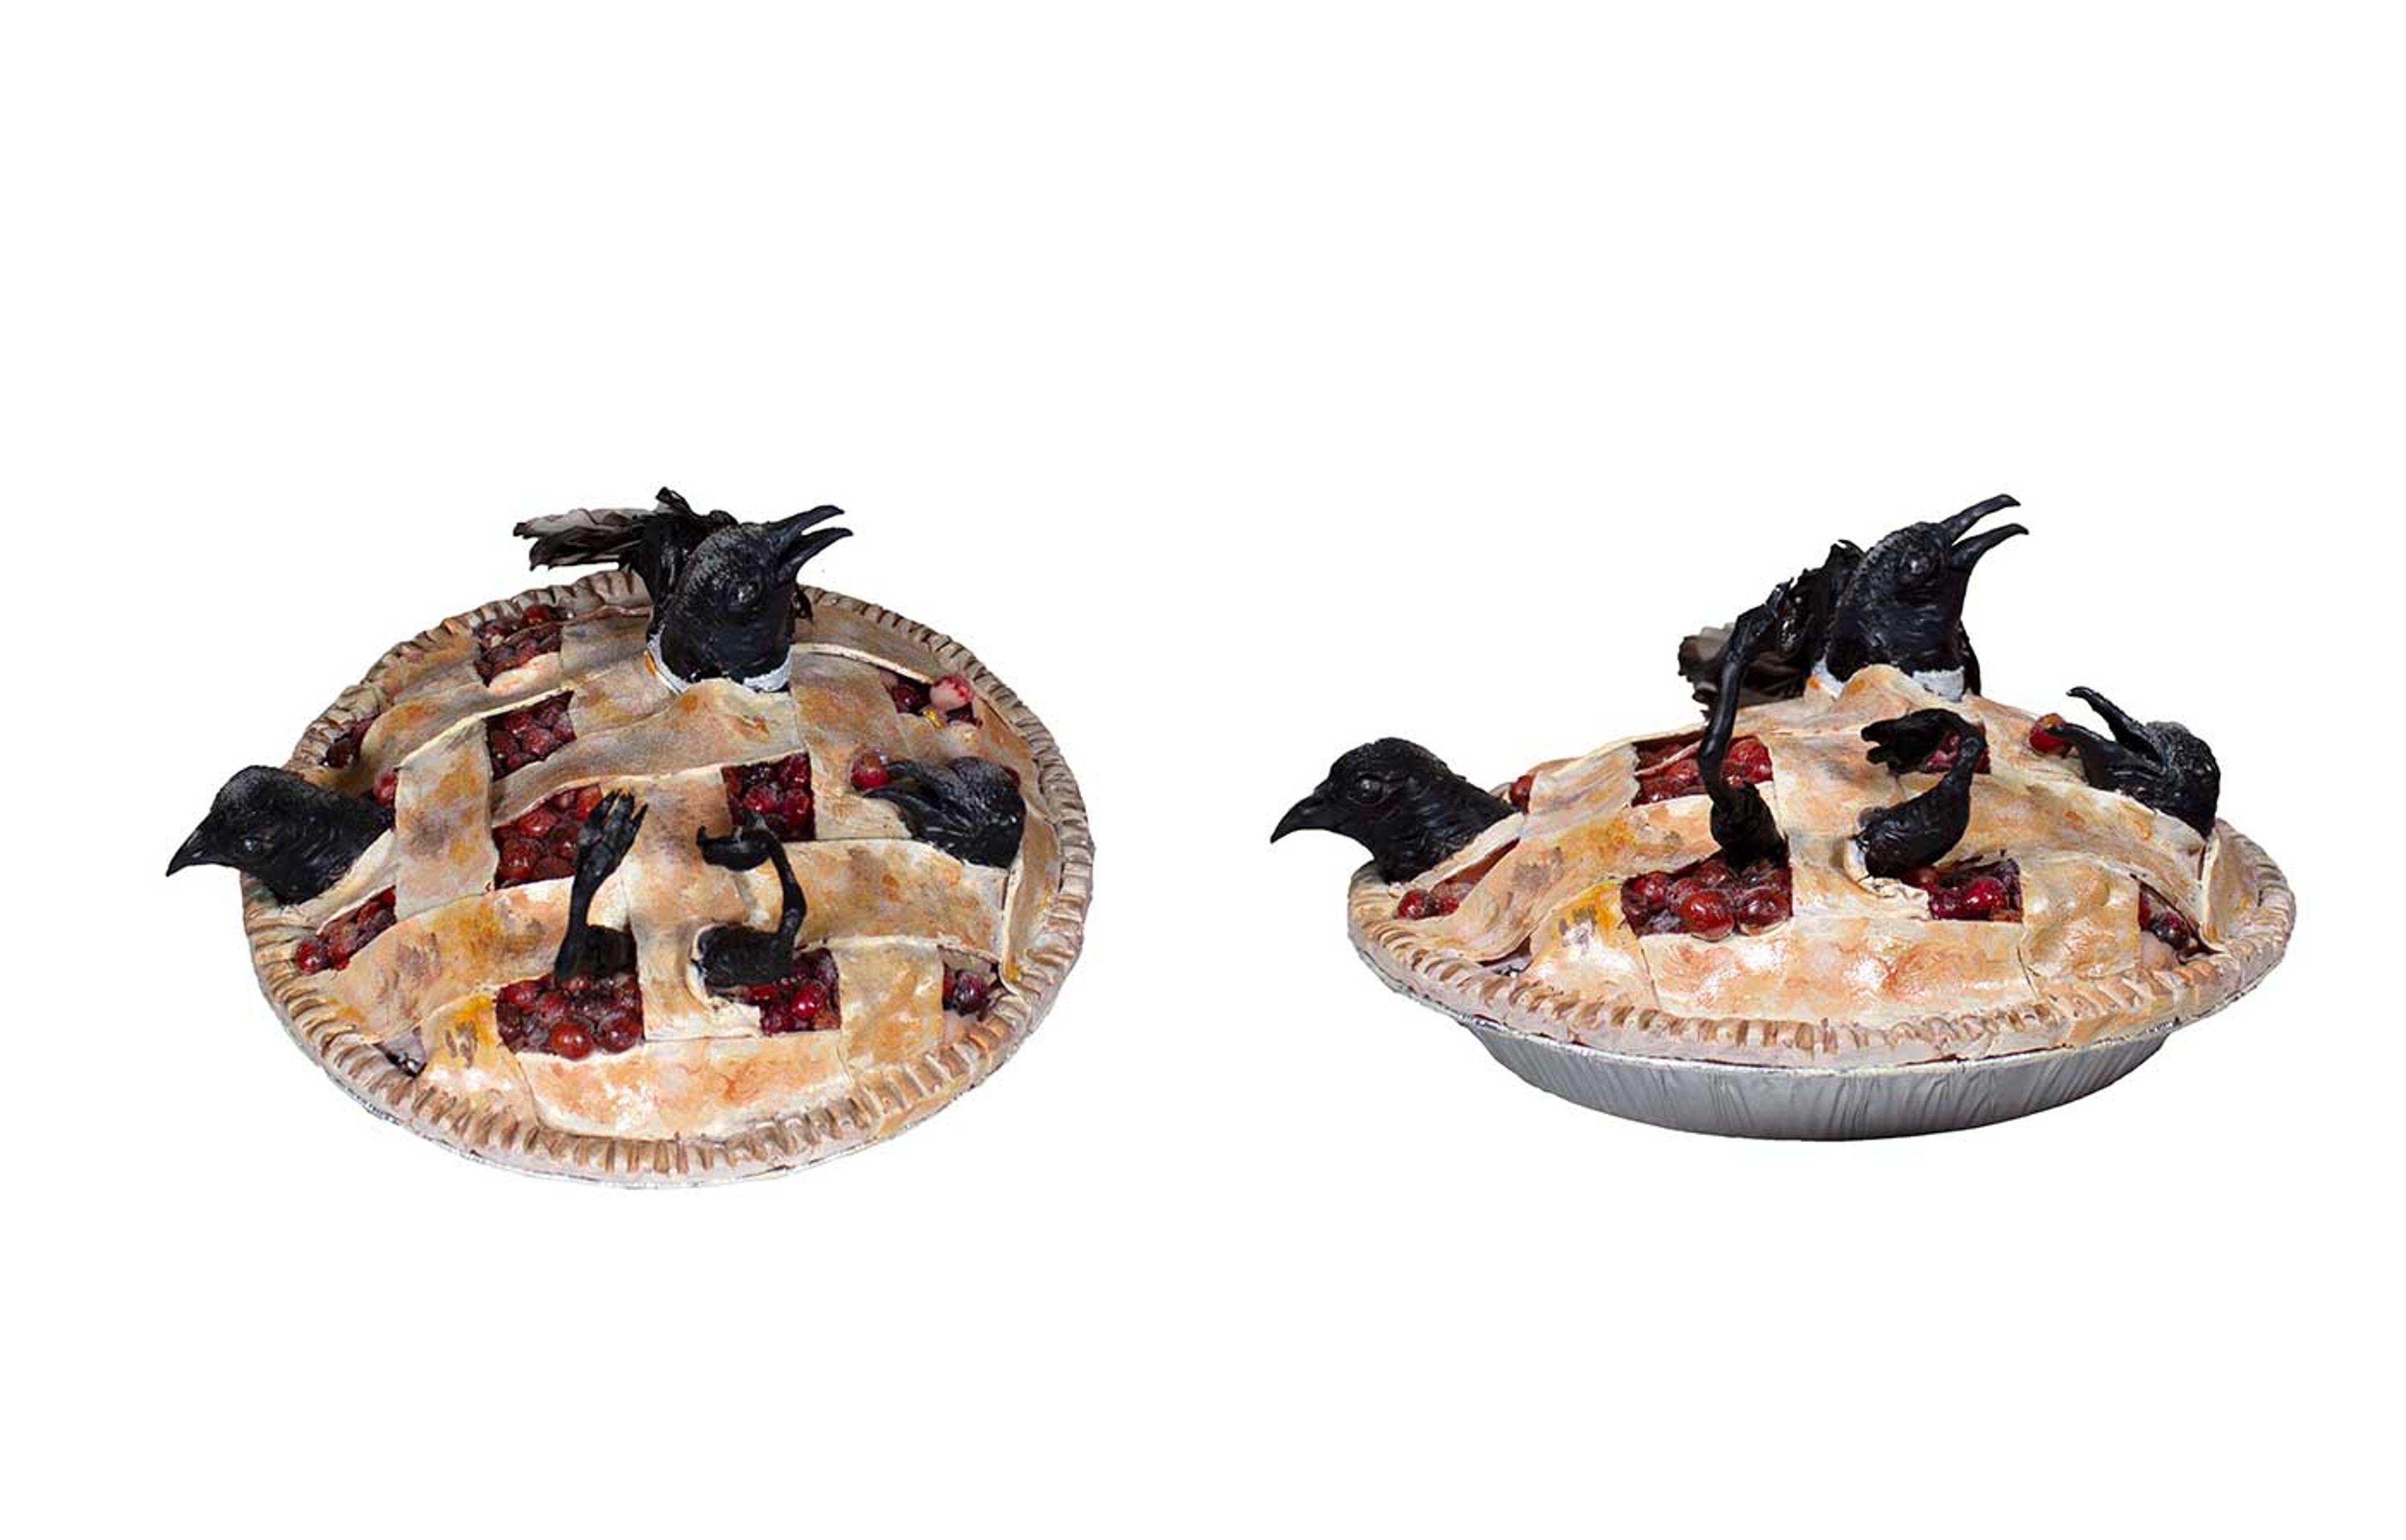 Sculpture of black birds bursting out of a pie with a lattice top.